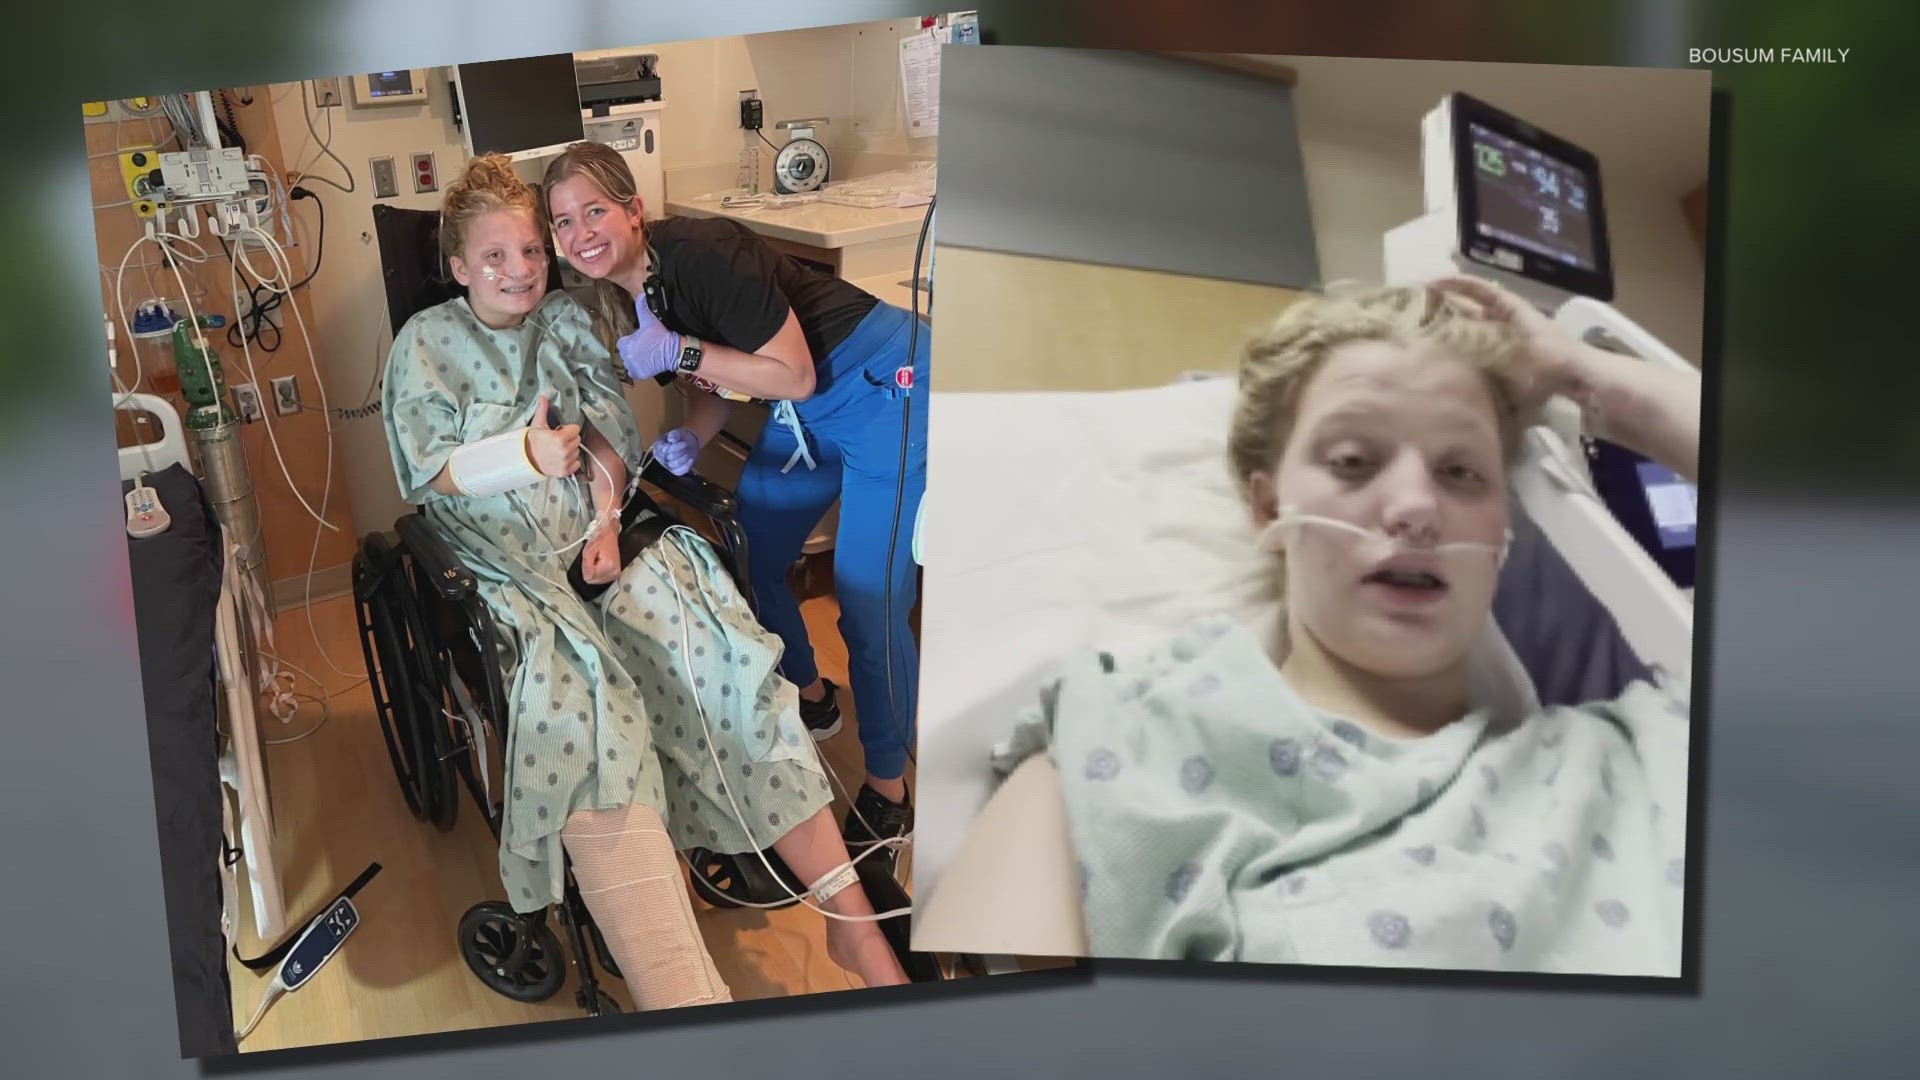 14-year-old Audrey Bousum was hit by a motorcycle while crossing Raceway Road in Brownsburg.